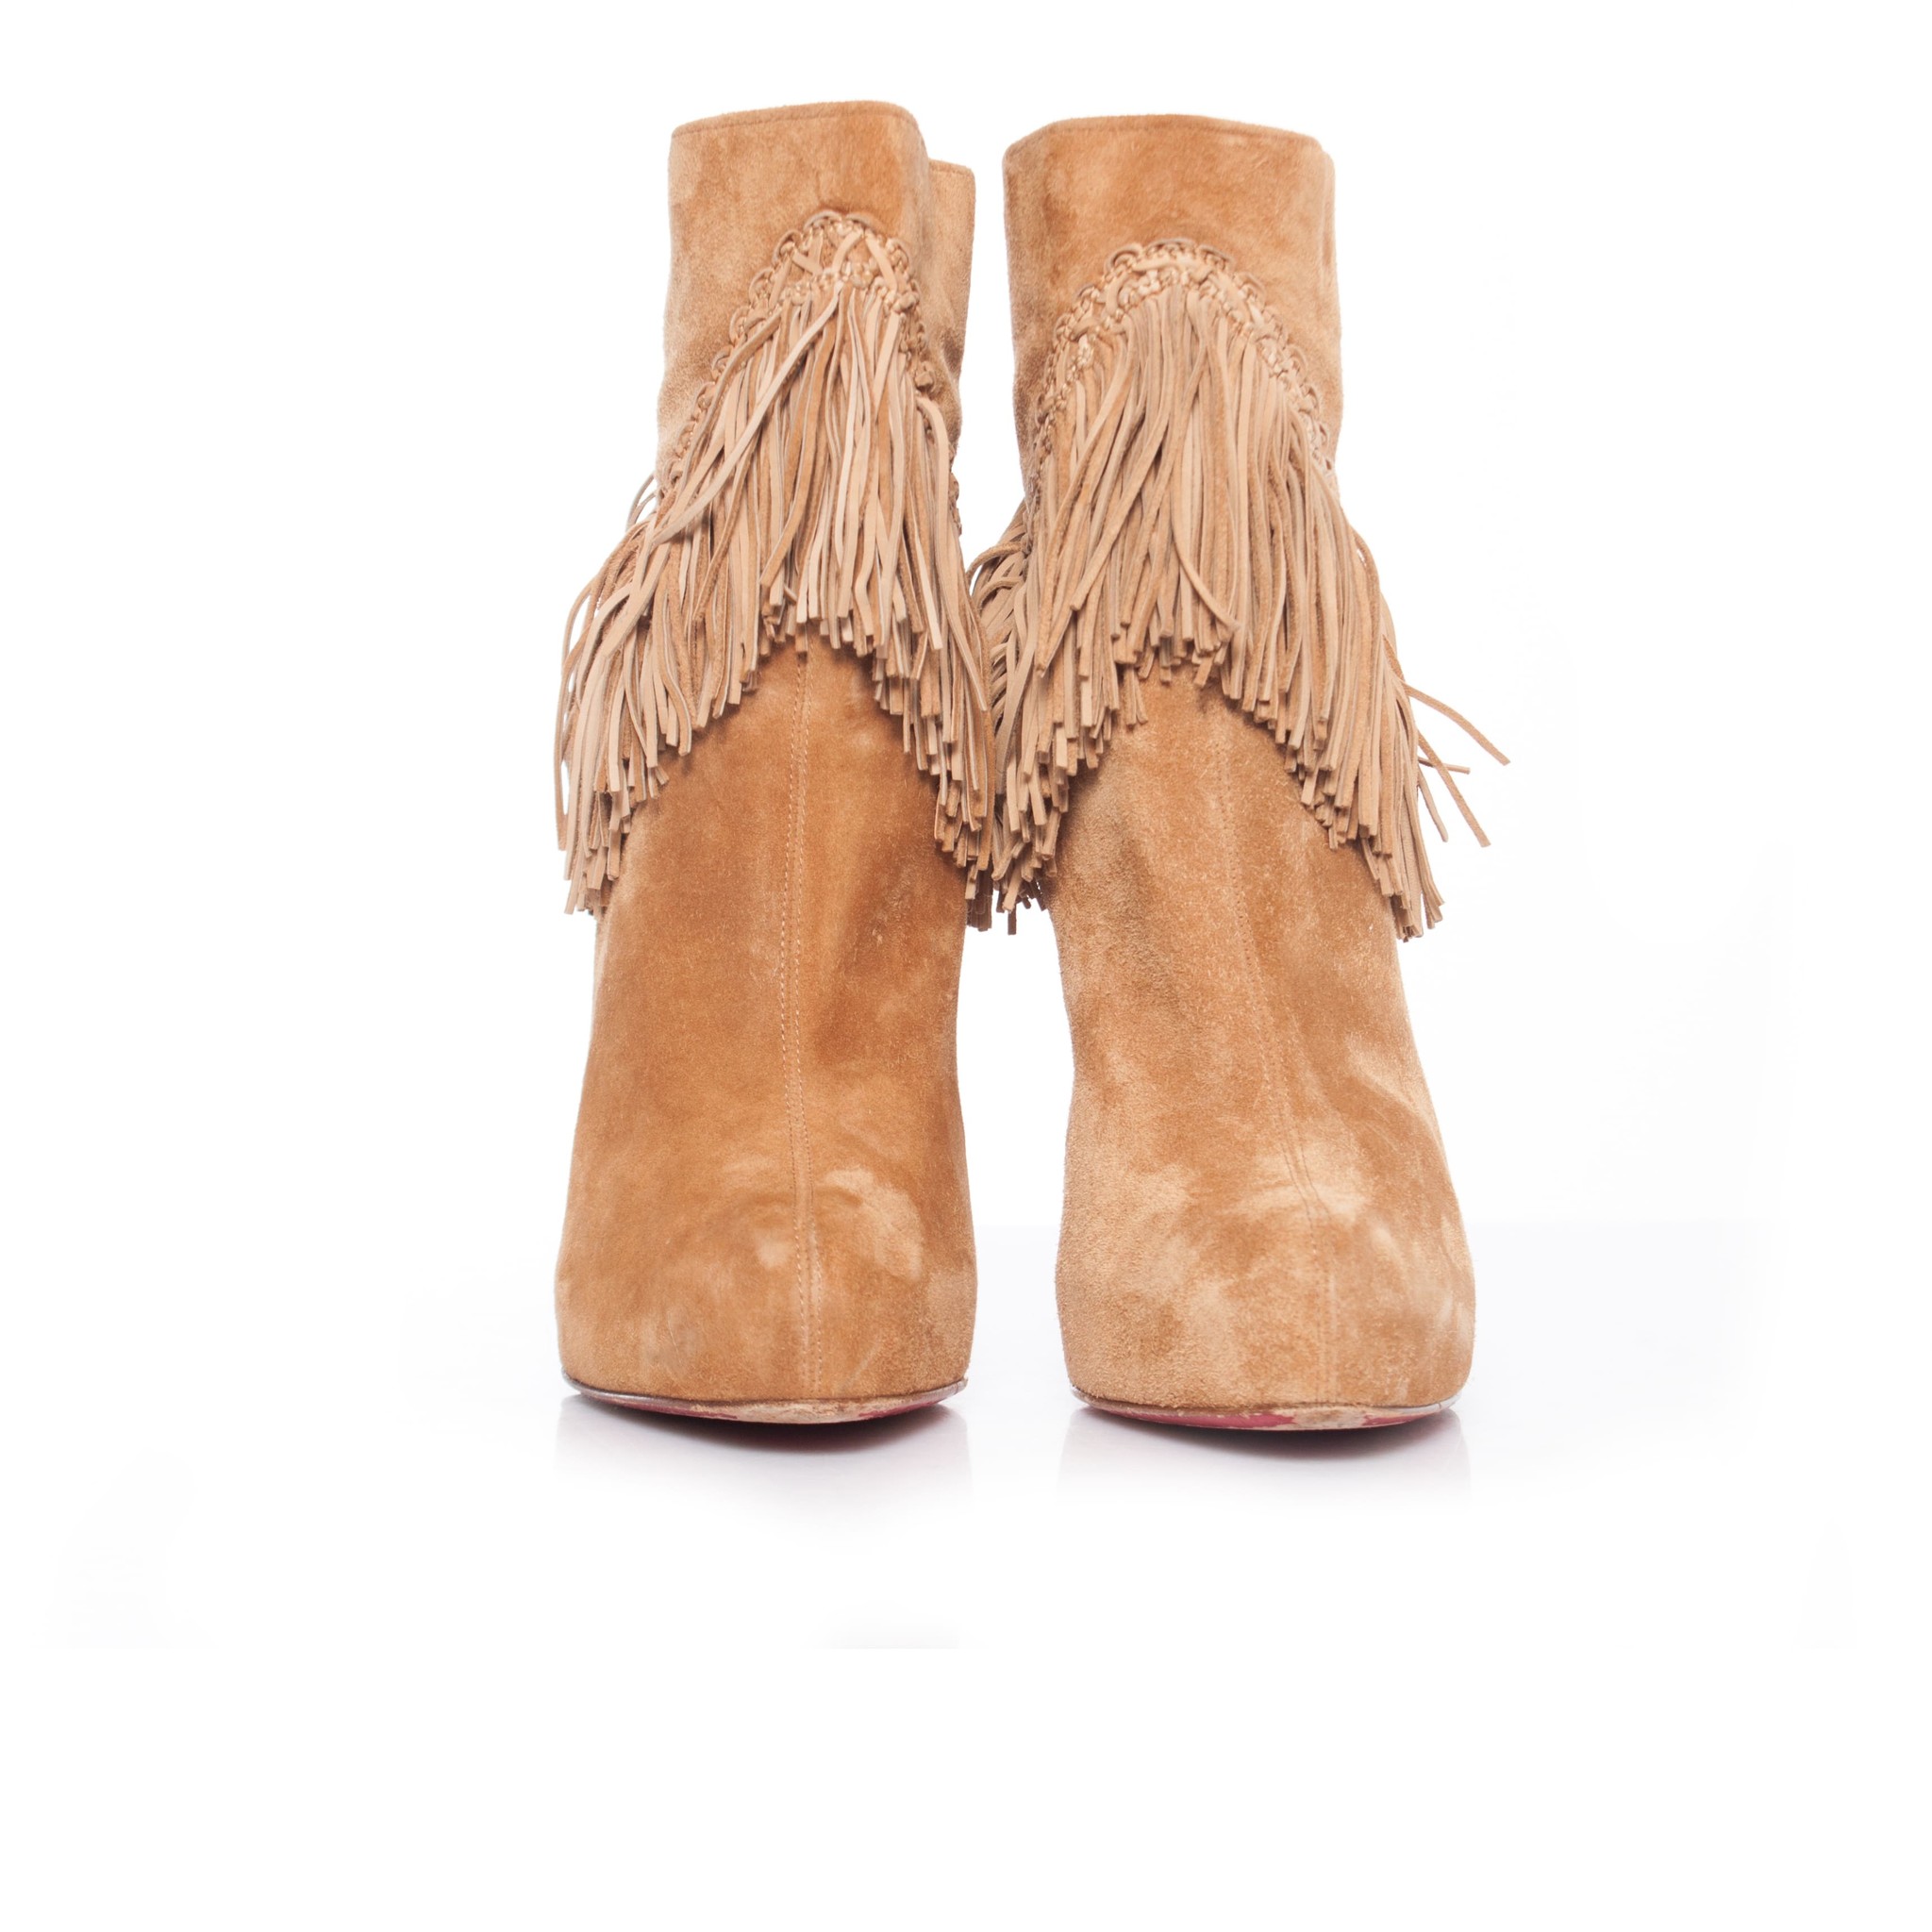 Western boots Christian Louboutin Camel size 39.5 EU in Suede